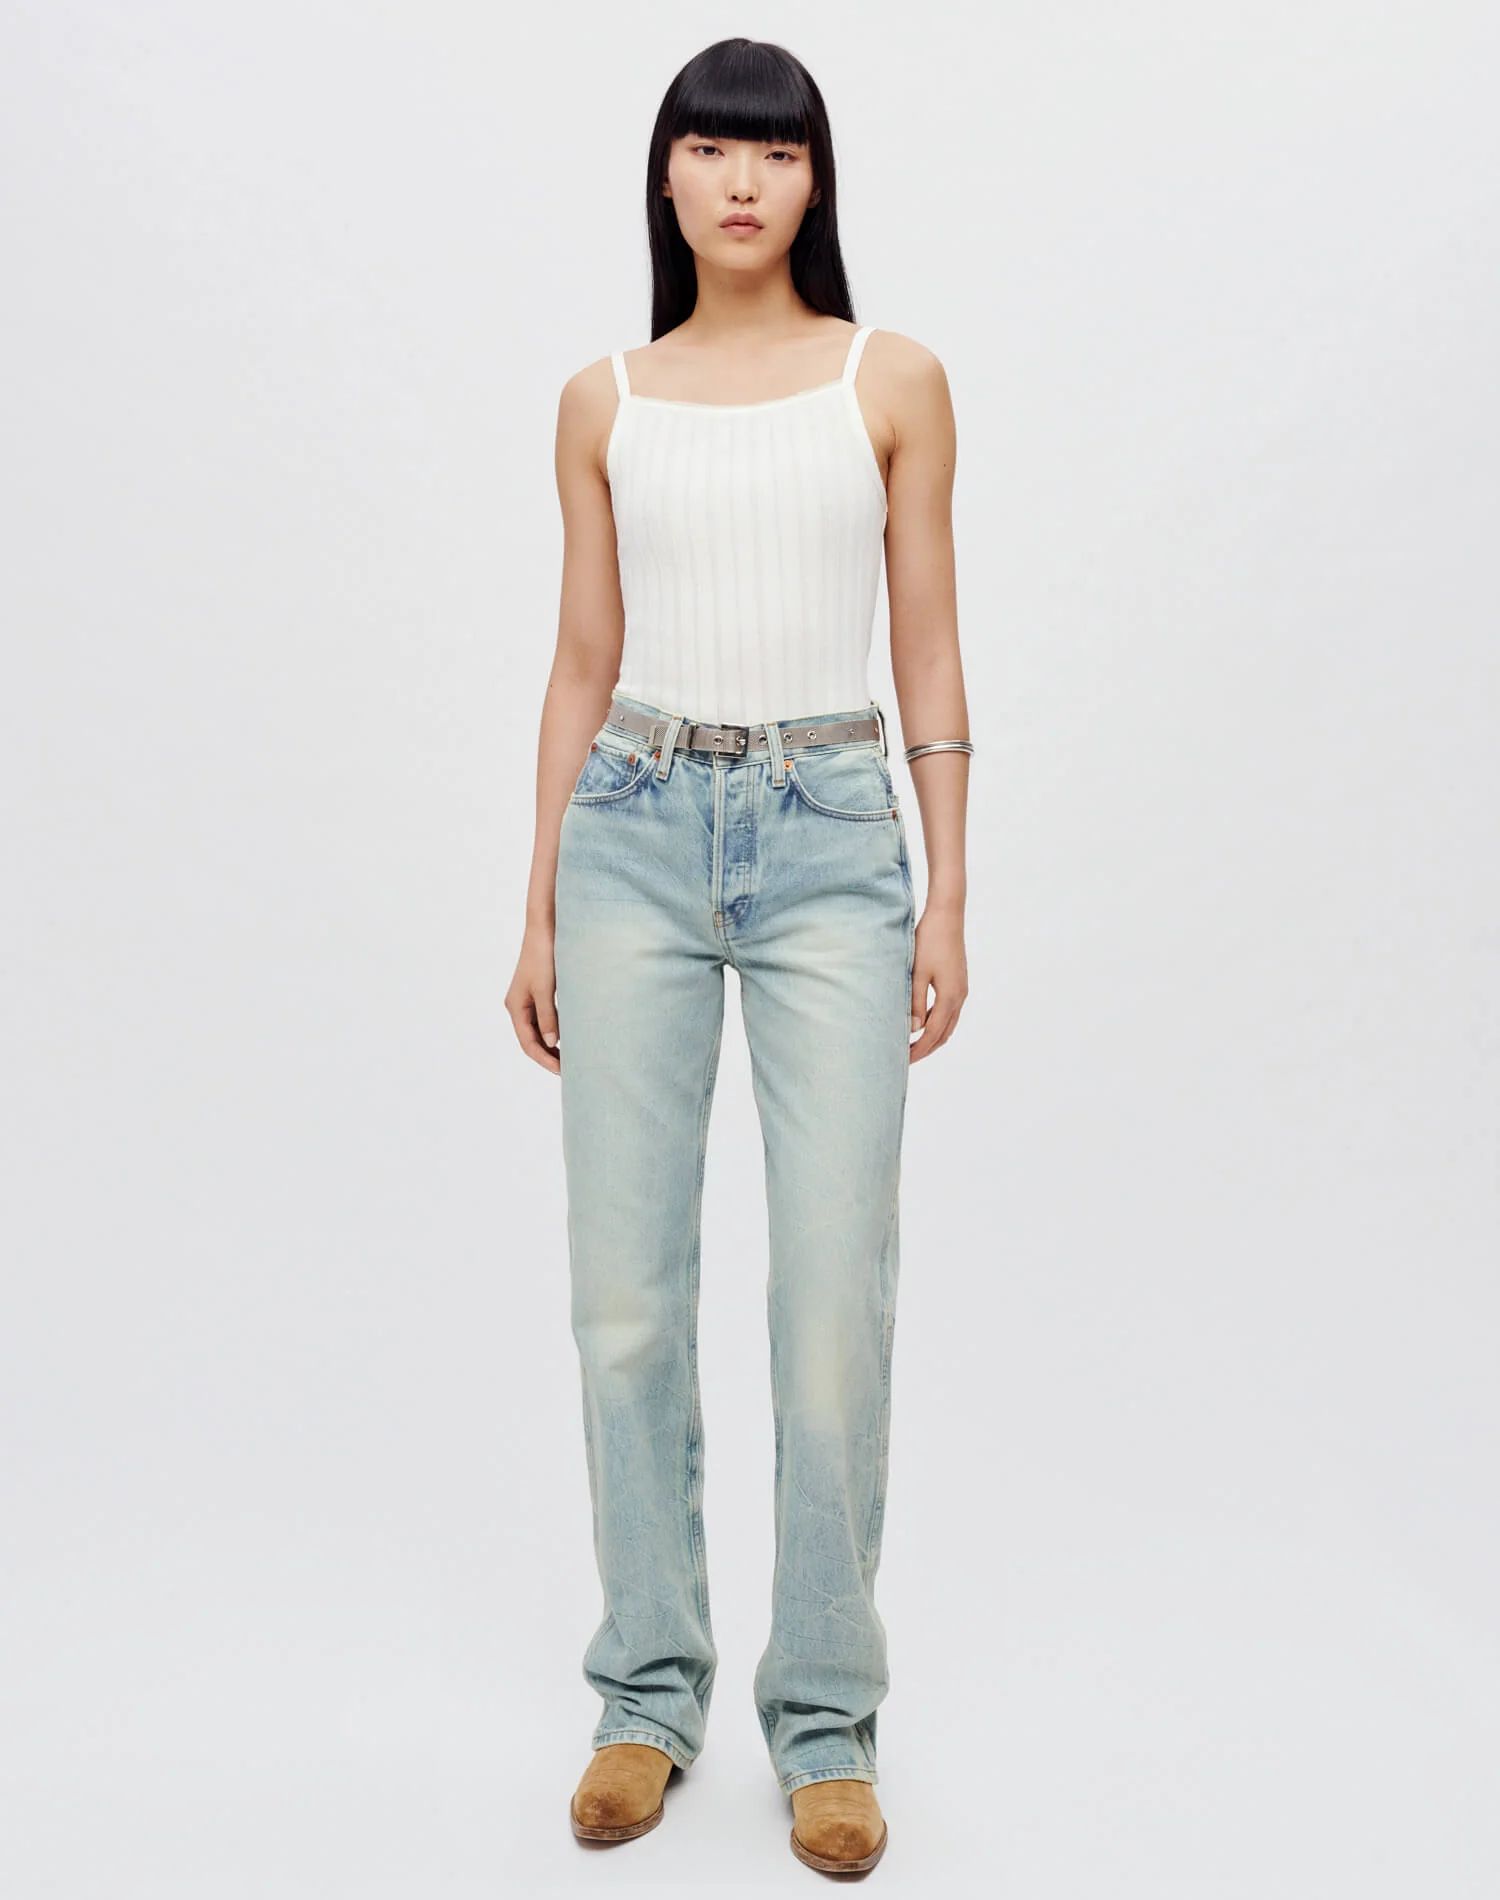 RE/DONE DENIM | 90s High Rise Loose in Ranch Water | RE/DONE